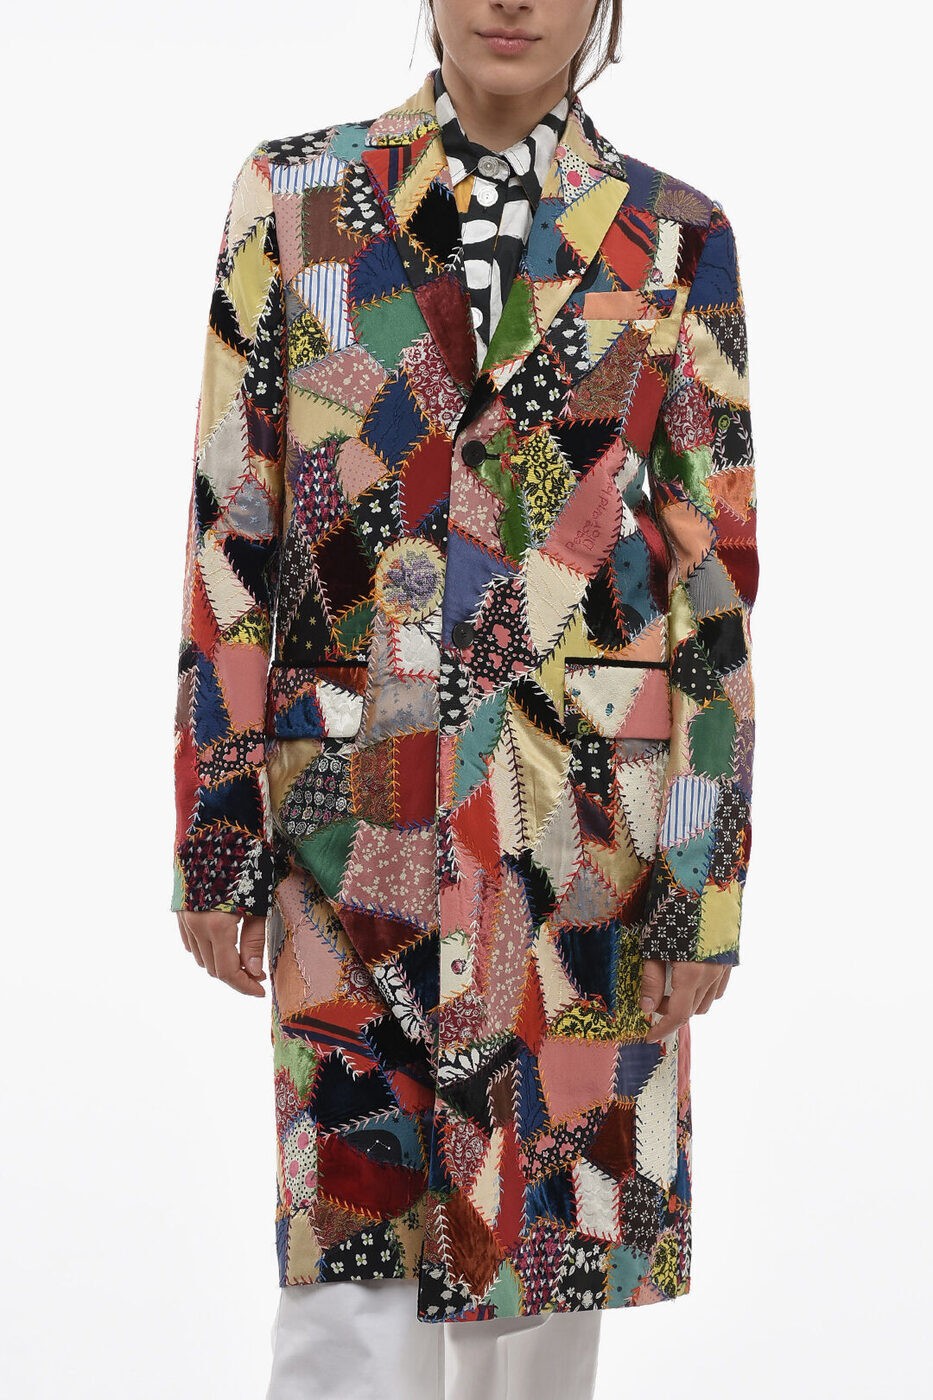 CHRISTIAN DIOR ディオール コート 851M22W9030 9601 レディース MULTIPATTERNED PATCHWORK COAT WITH ..